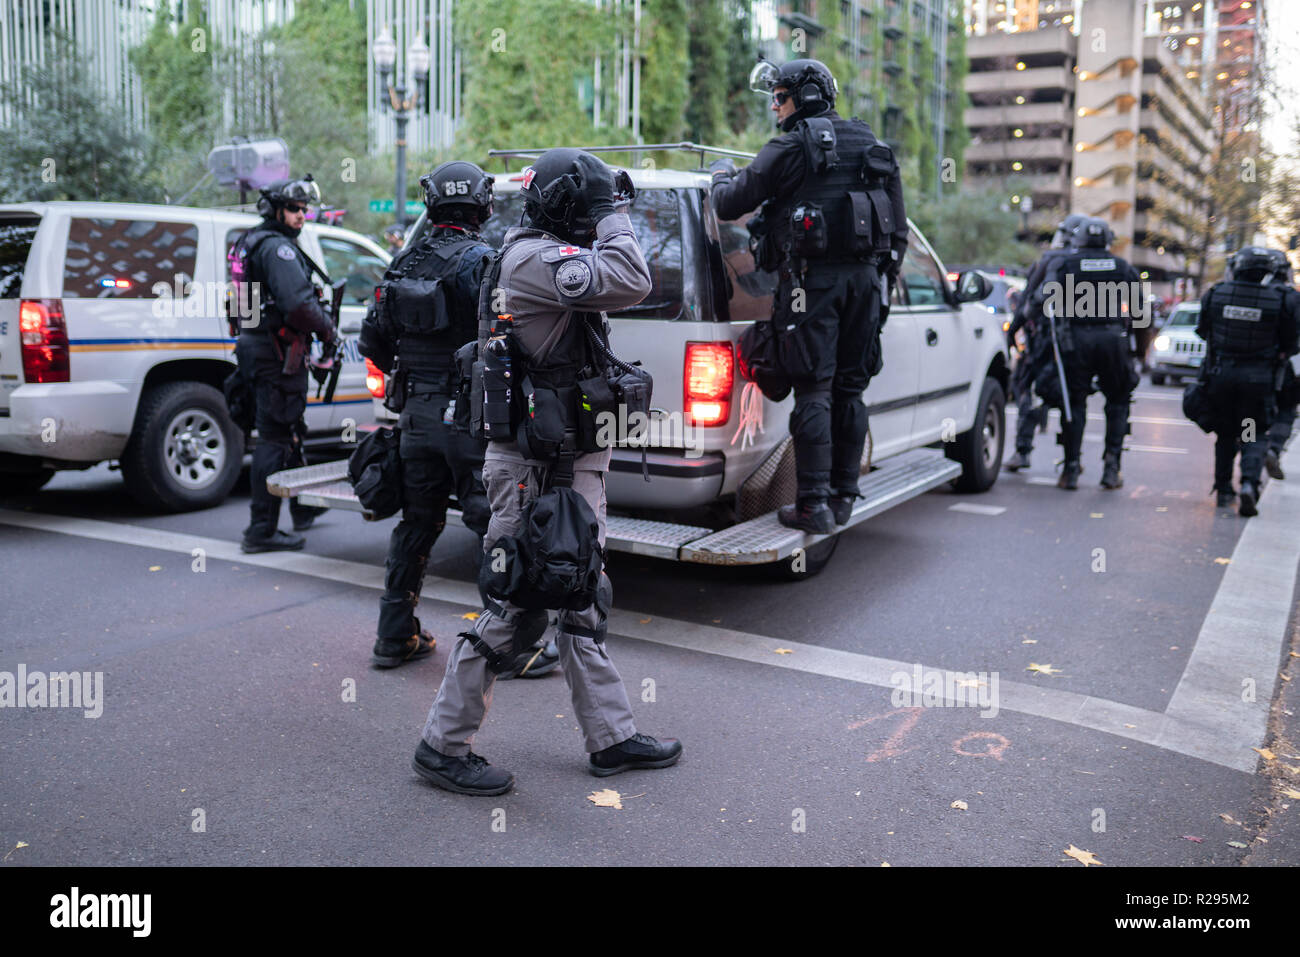 Portland, OR / USA - November 17 2018: Rapid response team police officers unit along with a medic at downtown demonstration that turned into civil di Stock Photo